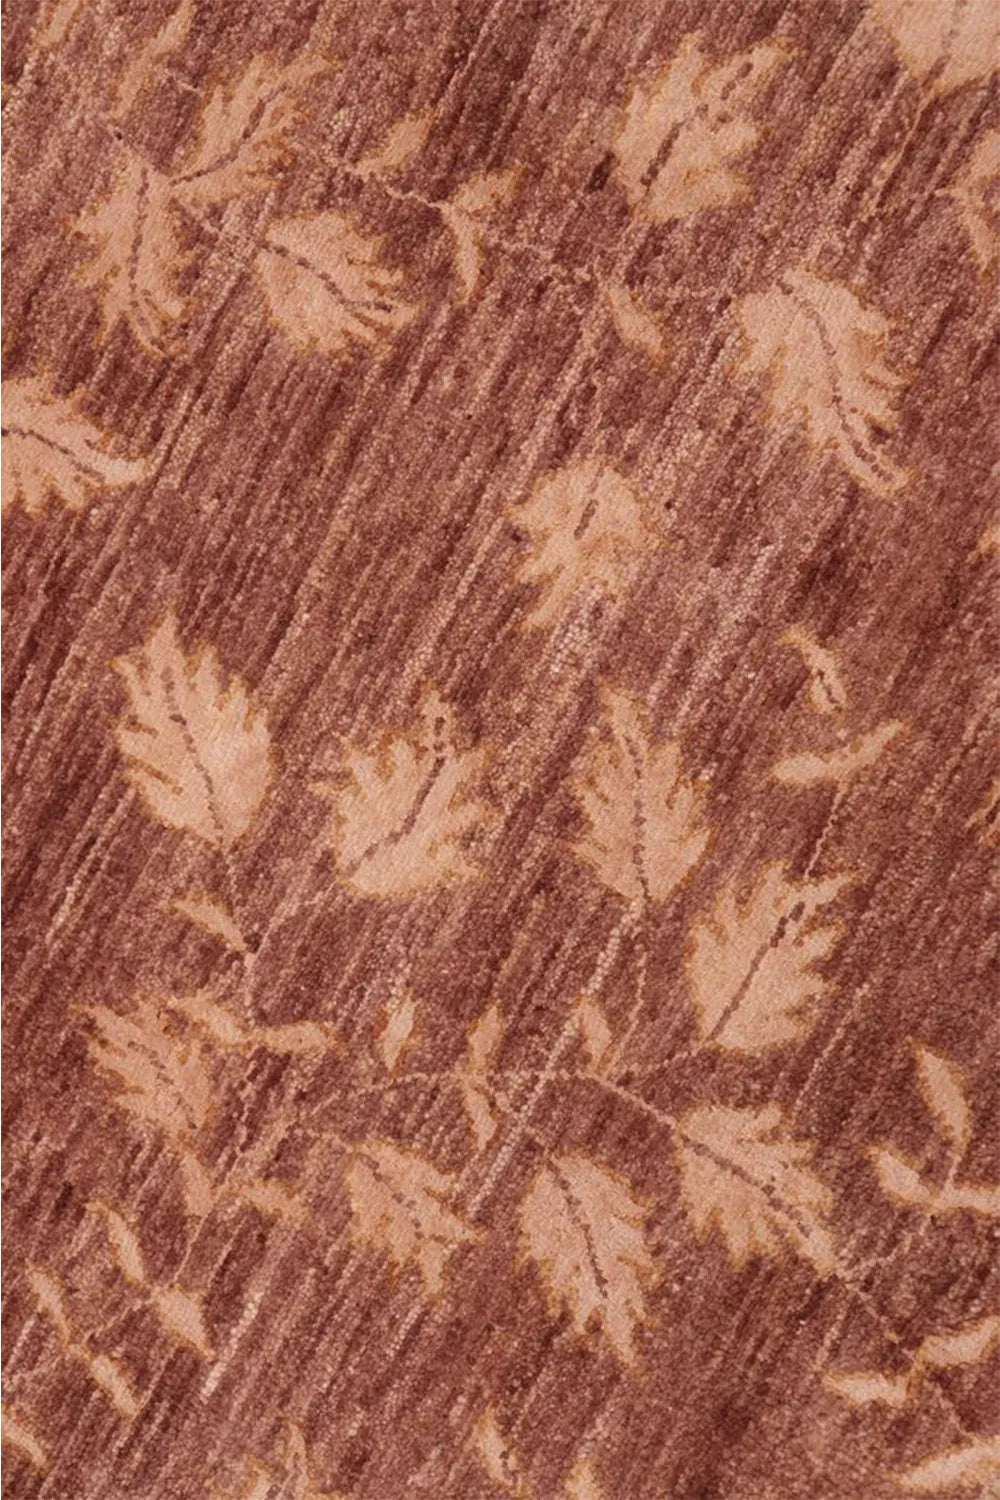 Organic touch in a brown wool rug, hand-knotted and designed for elegance.